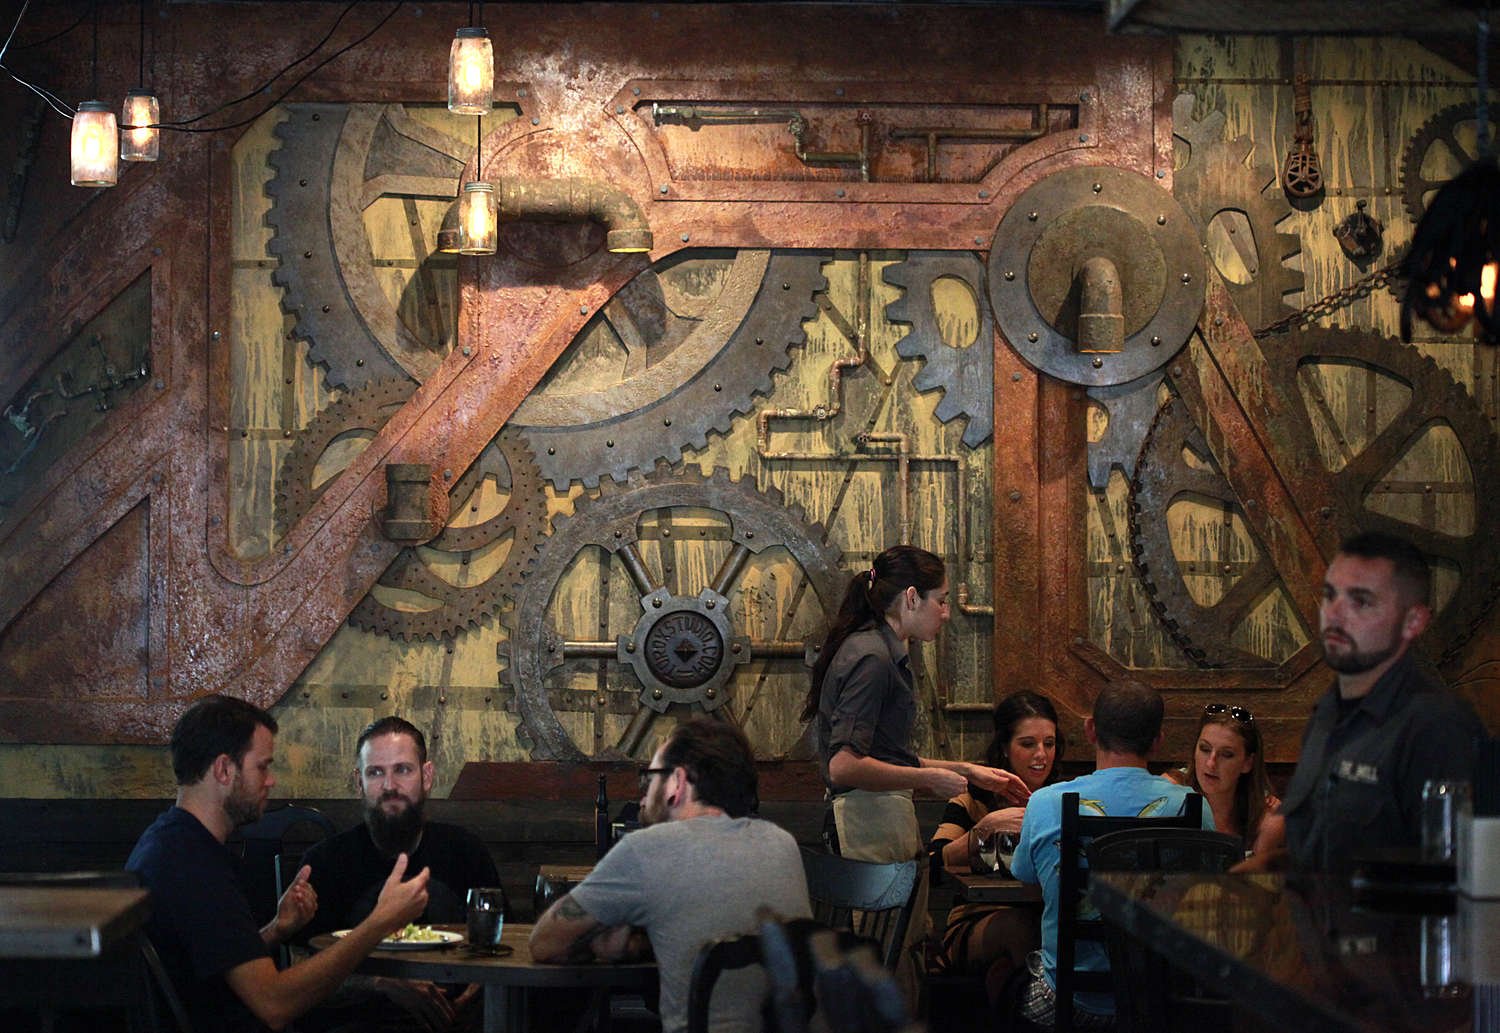 Diners at tables in front of a wall decorated with industrial gears and pipes